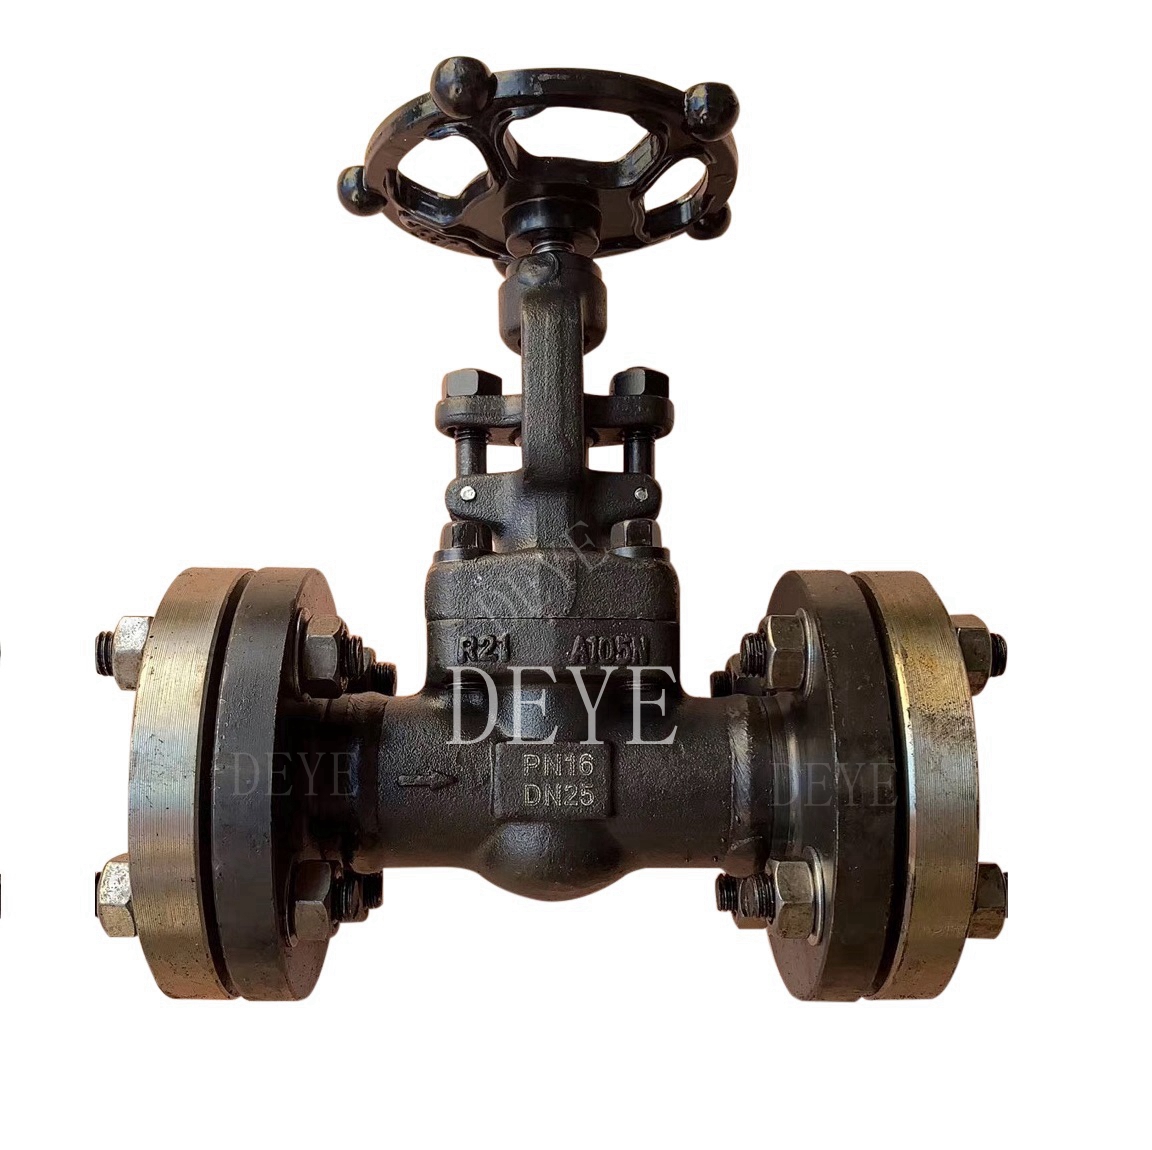 Short Lead Time for Check Valve With Nbr Seat -
 A105 Forged steel Gate Valve with counter flanges GVC-0016-1F – Deye